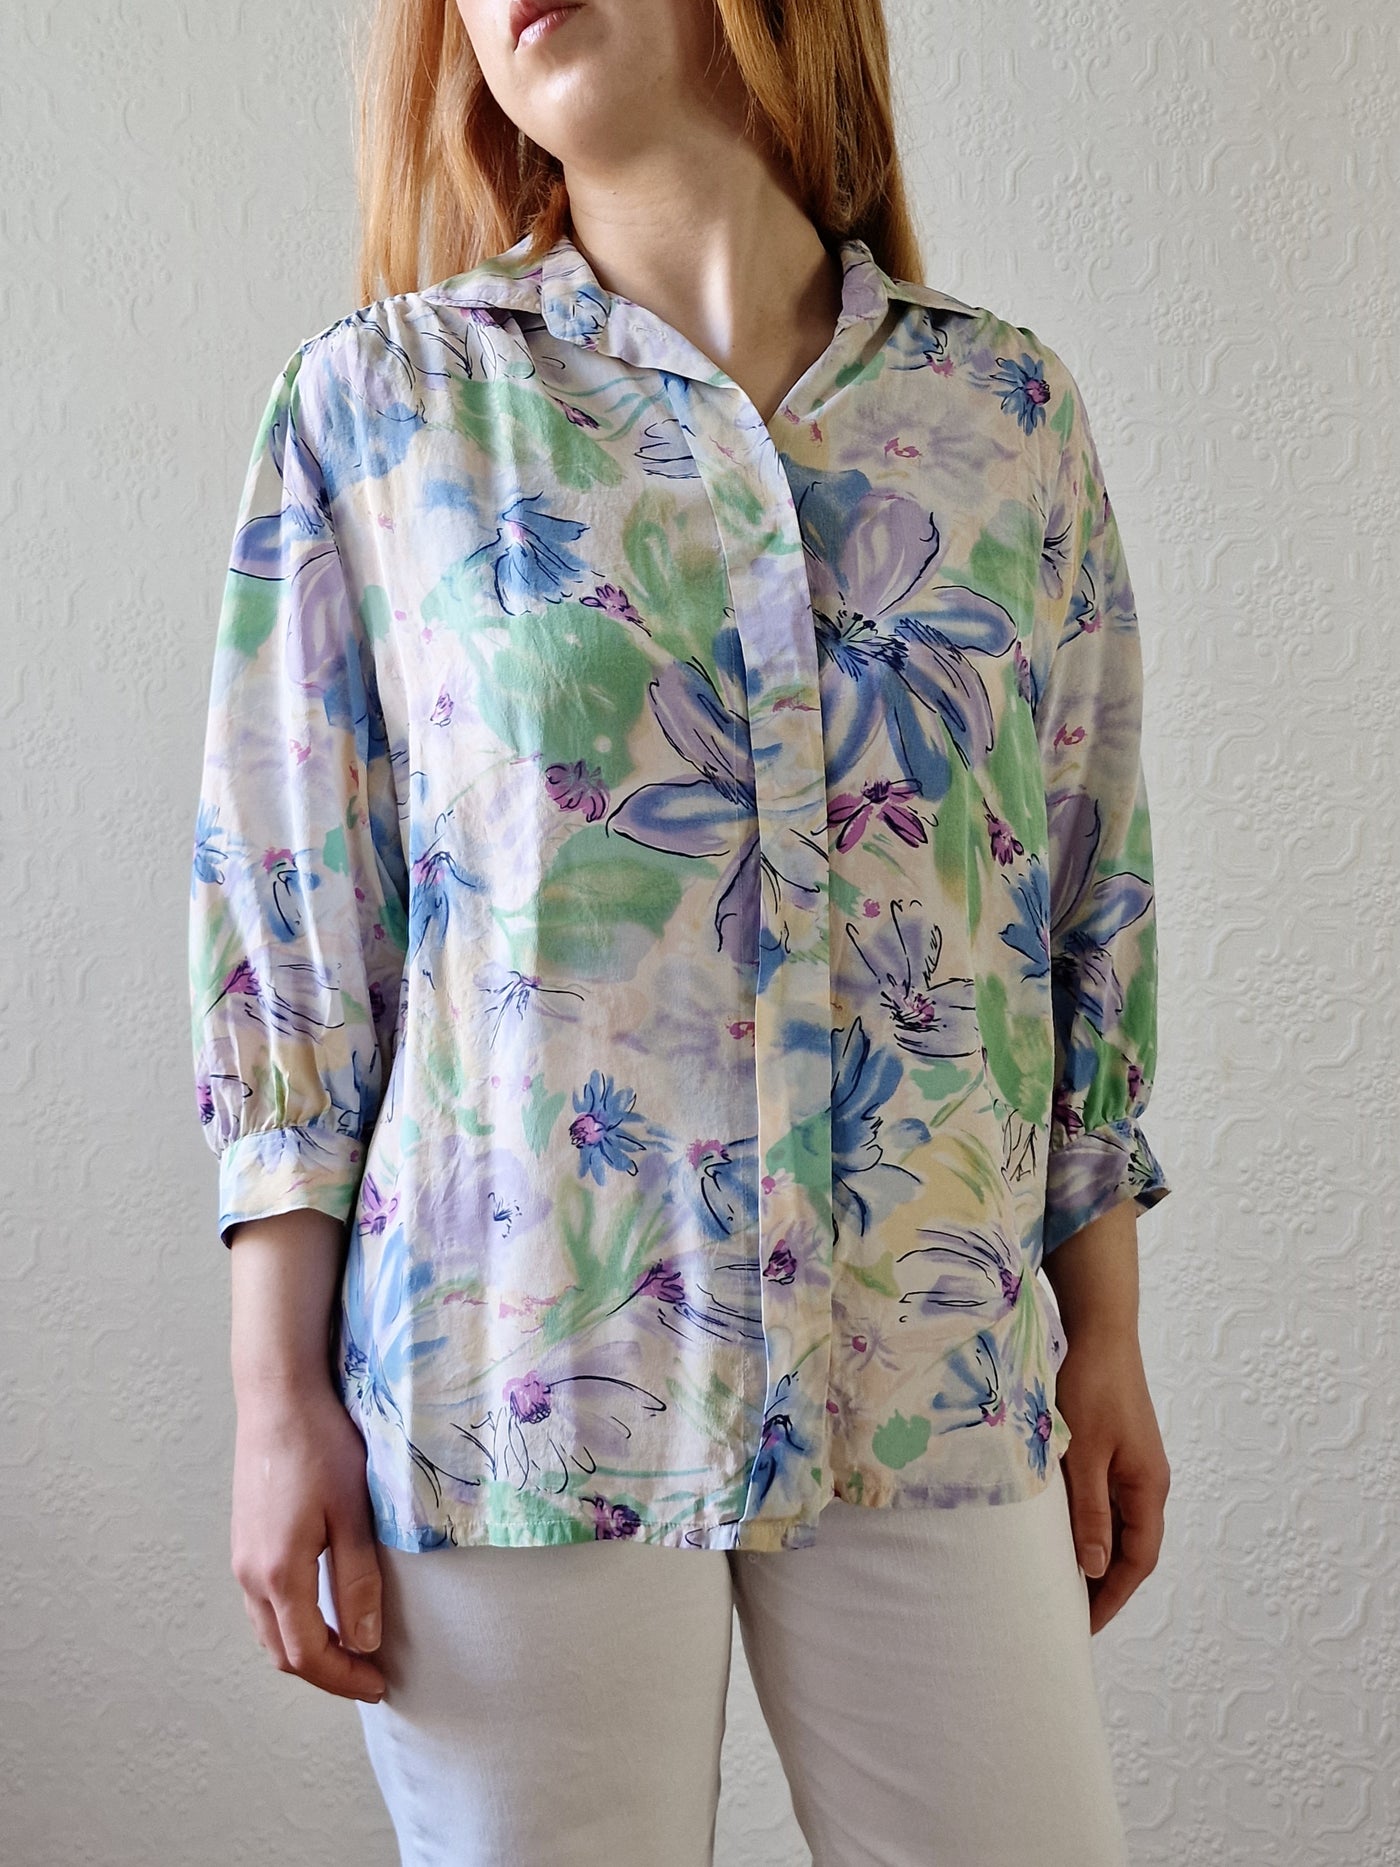 Vintage 80s Blue & Green Floral 100% Silk Blouse with 3/4 Sleeves - S/M